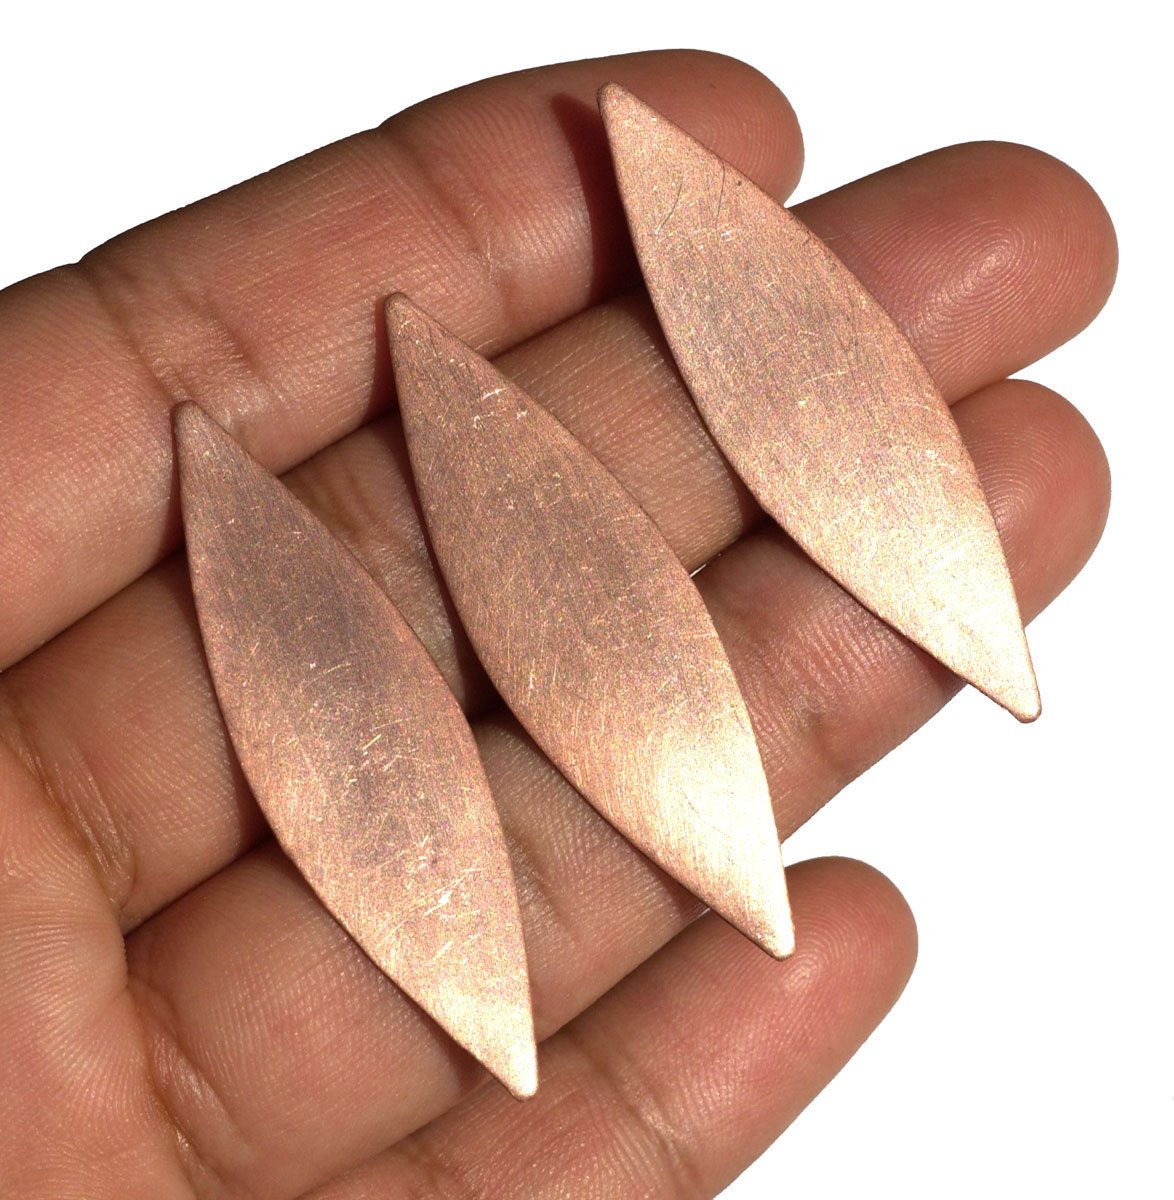 Diamond Rounded Blanks 45.5mm x 13.5mm 20g Shape Cutout Blank for Enameling Stamping Texturing Variety of Metals